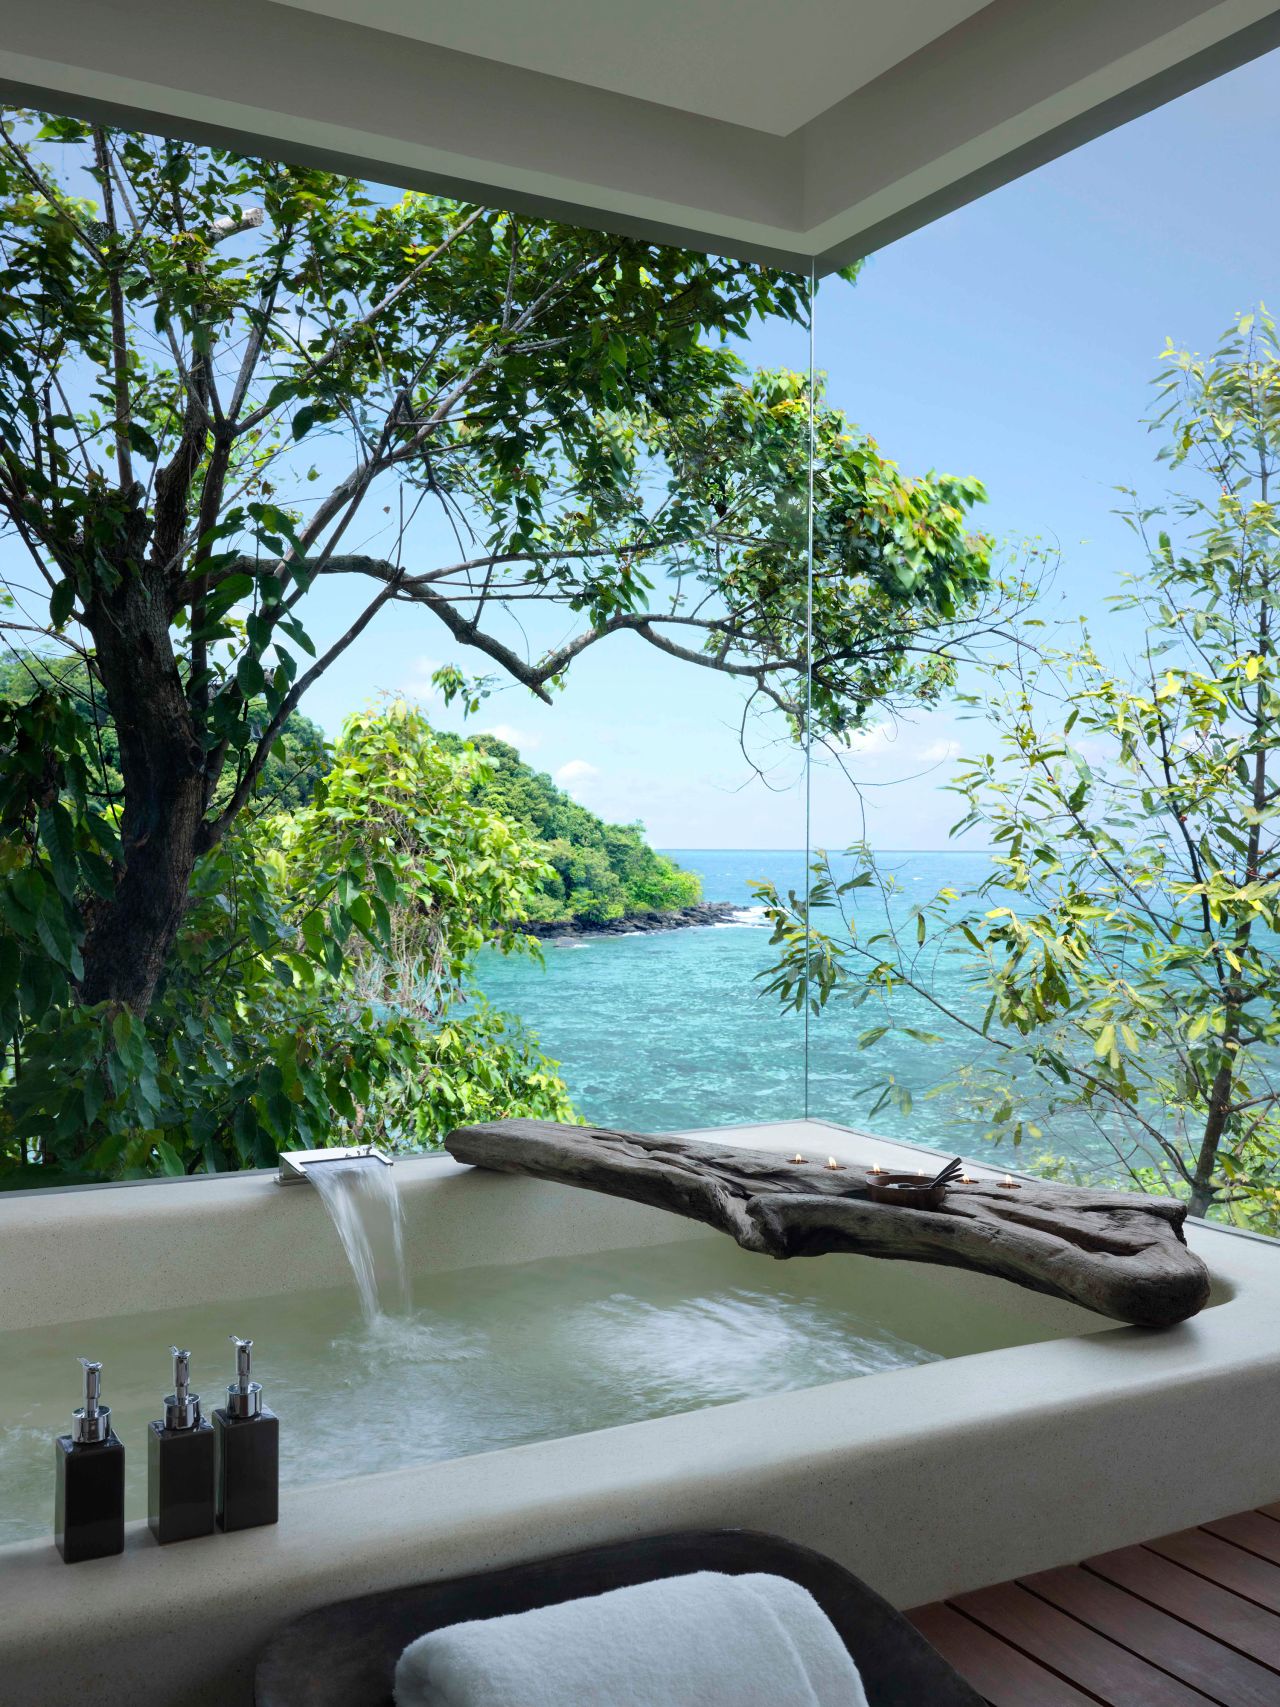 Terrazzo composite-stone bathtubs have views of the Gulf of Thailand at Song Saa, a private island hideaway in southern Cambodia.